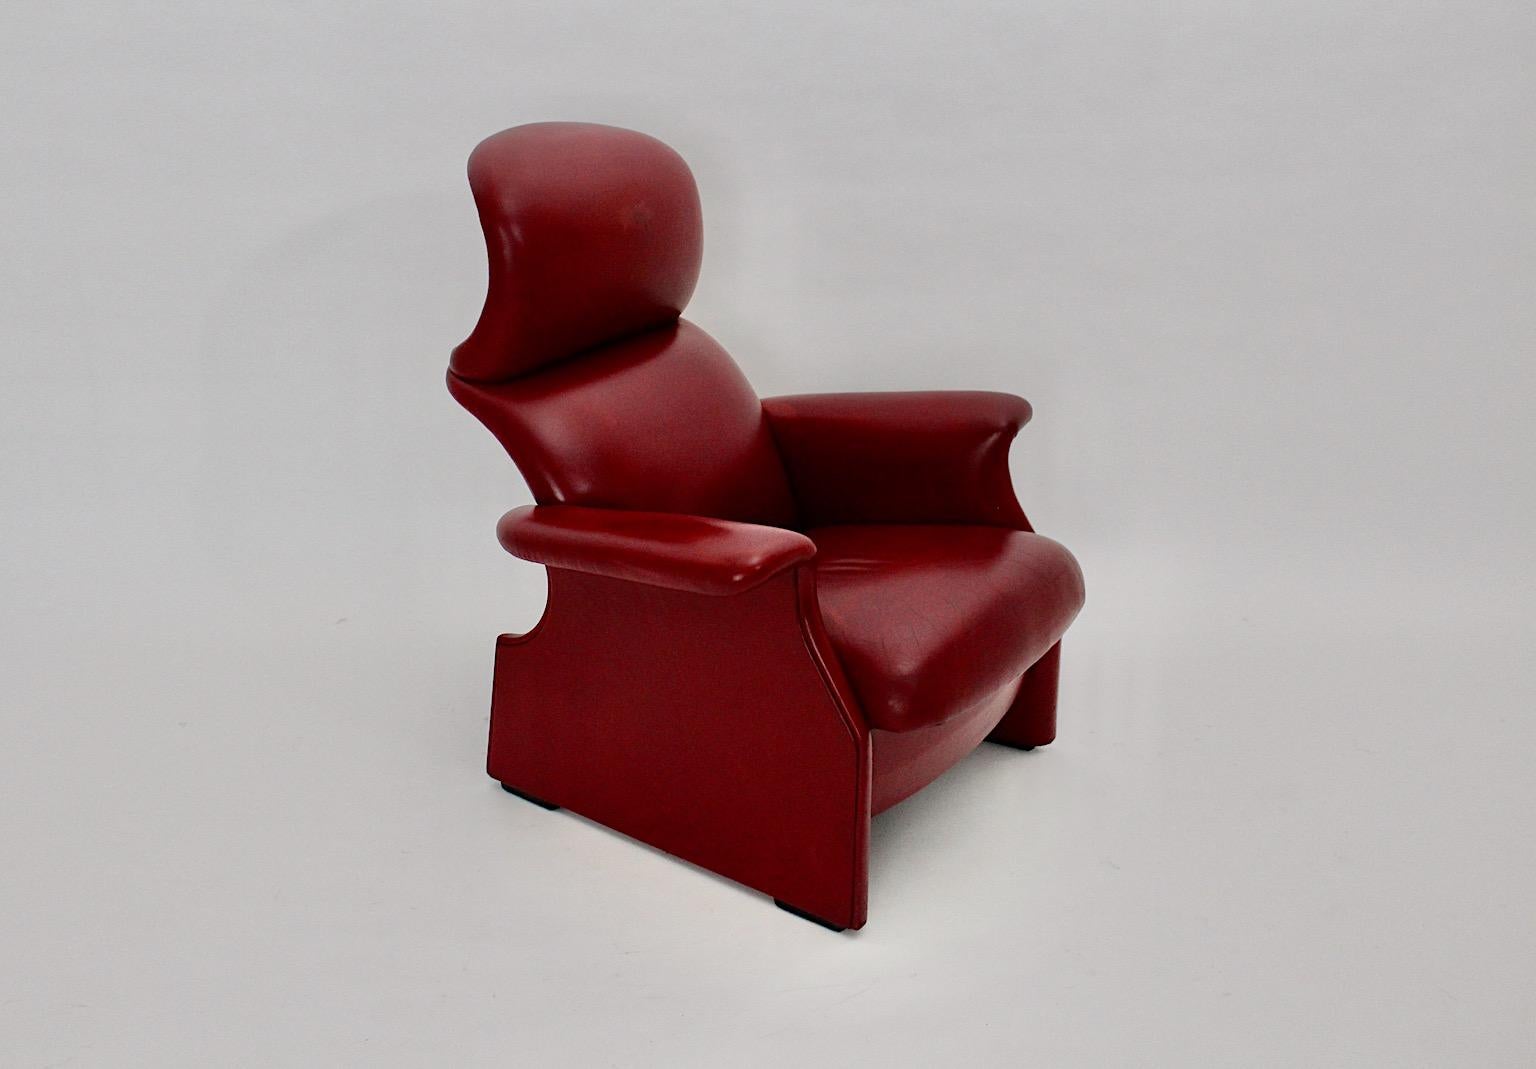 Space Age vintage San Luca sculptural lounge chair or armchair from leather in burnt red color Italy 1960s designed by Achille & Piero Castiglioni.
This very comfortable organic and sculptural lounge chair works perfectly as freestanding comfortable